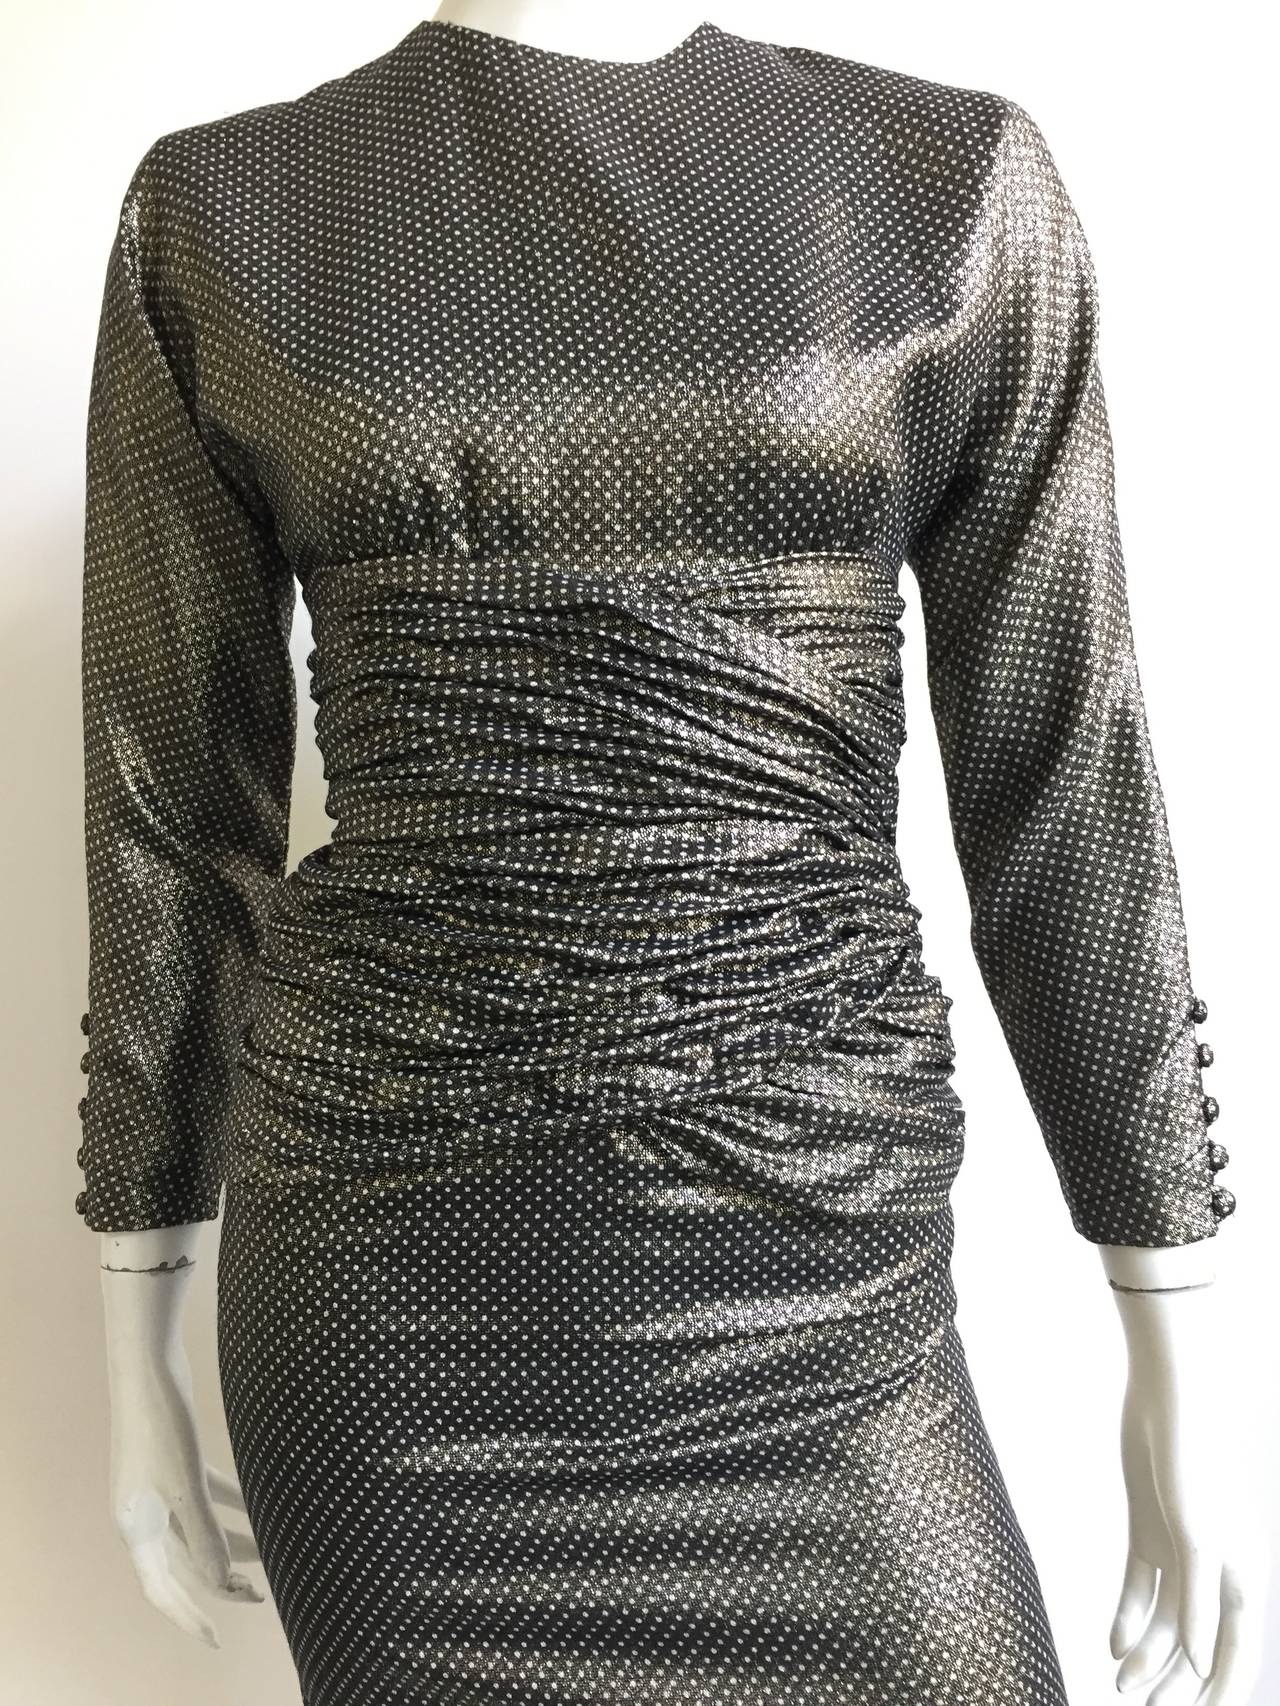 Carolyne Roehm 1980s metallic polka dot evening dress size 4. The ruching at waist line adds that classic Carolyne Roehm touch. Fabric covered buttons at sleeve and zipper in back.
Measurements are:
29